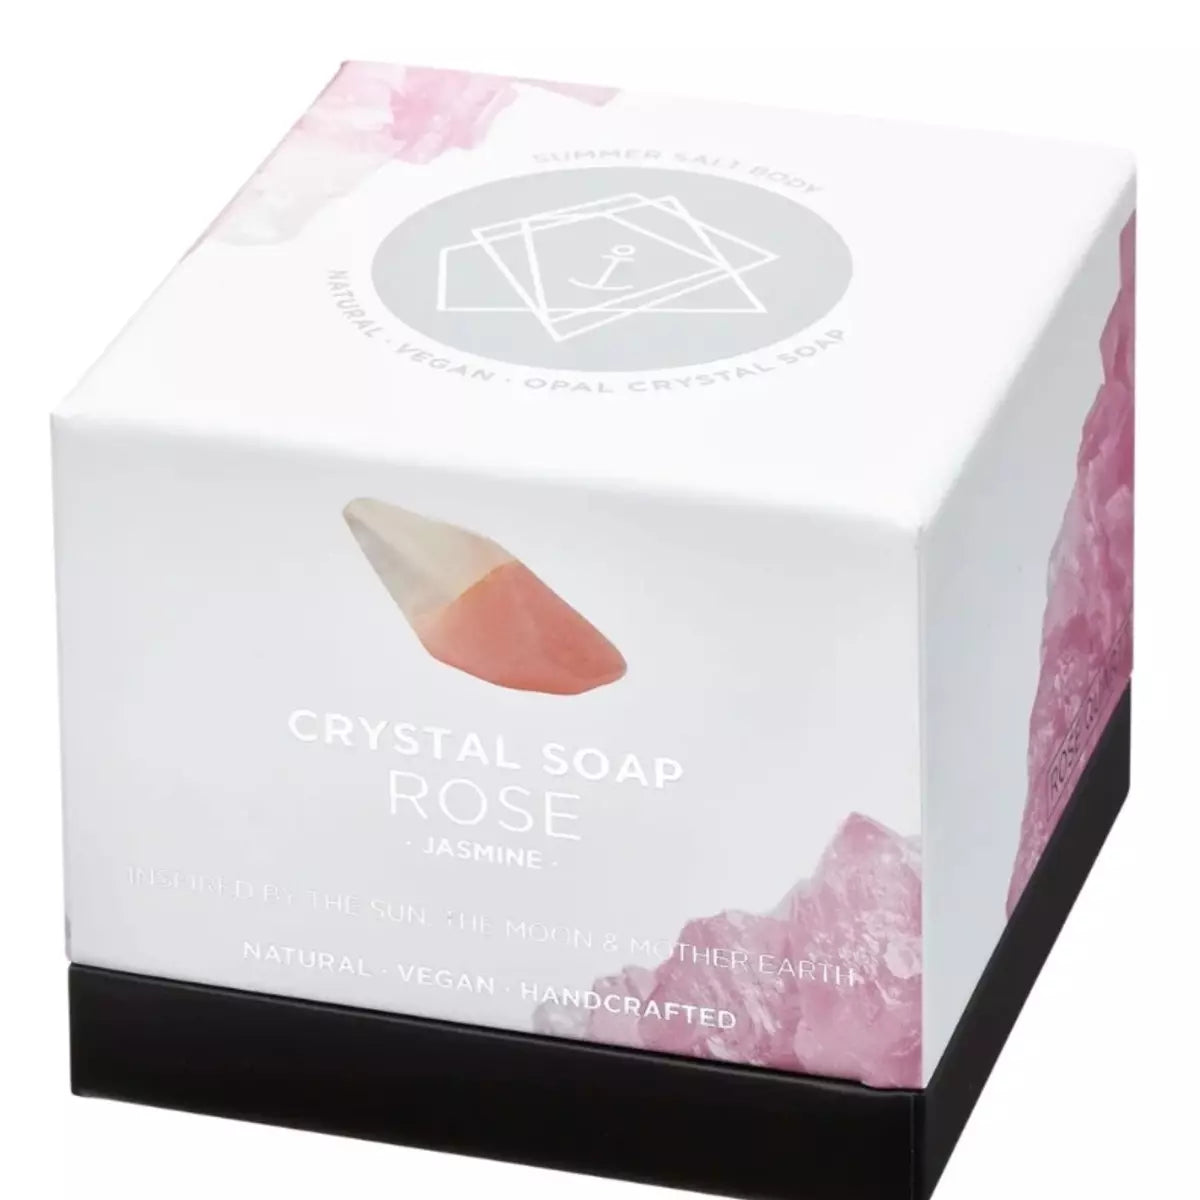 A self-love Crystal Soap - ROSE QUARTZ - Jasmine in a white box infused with the soothing energy of Rose Quartz from Summer Salt Body.